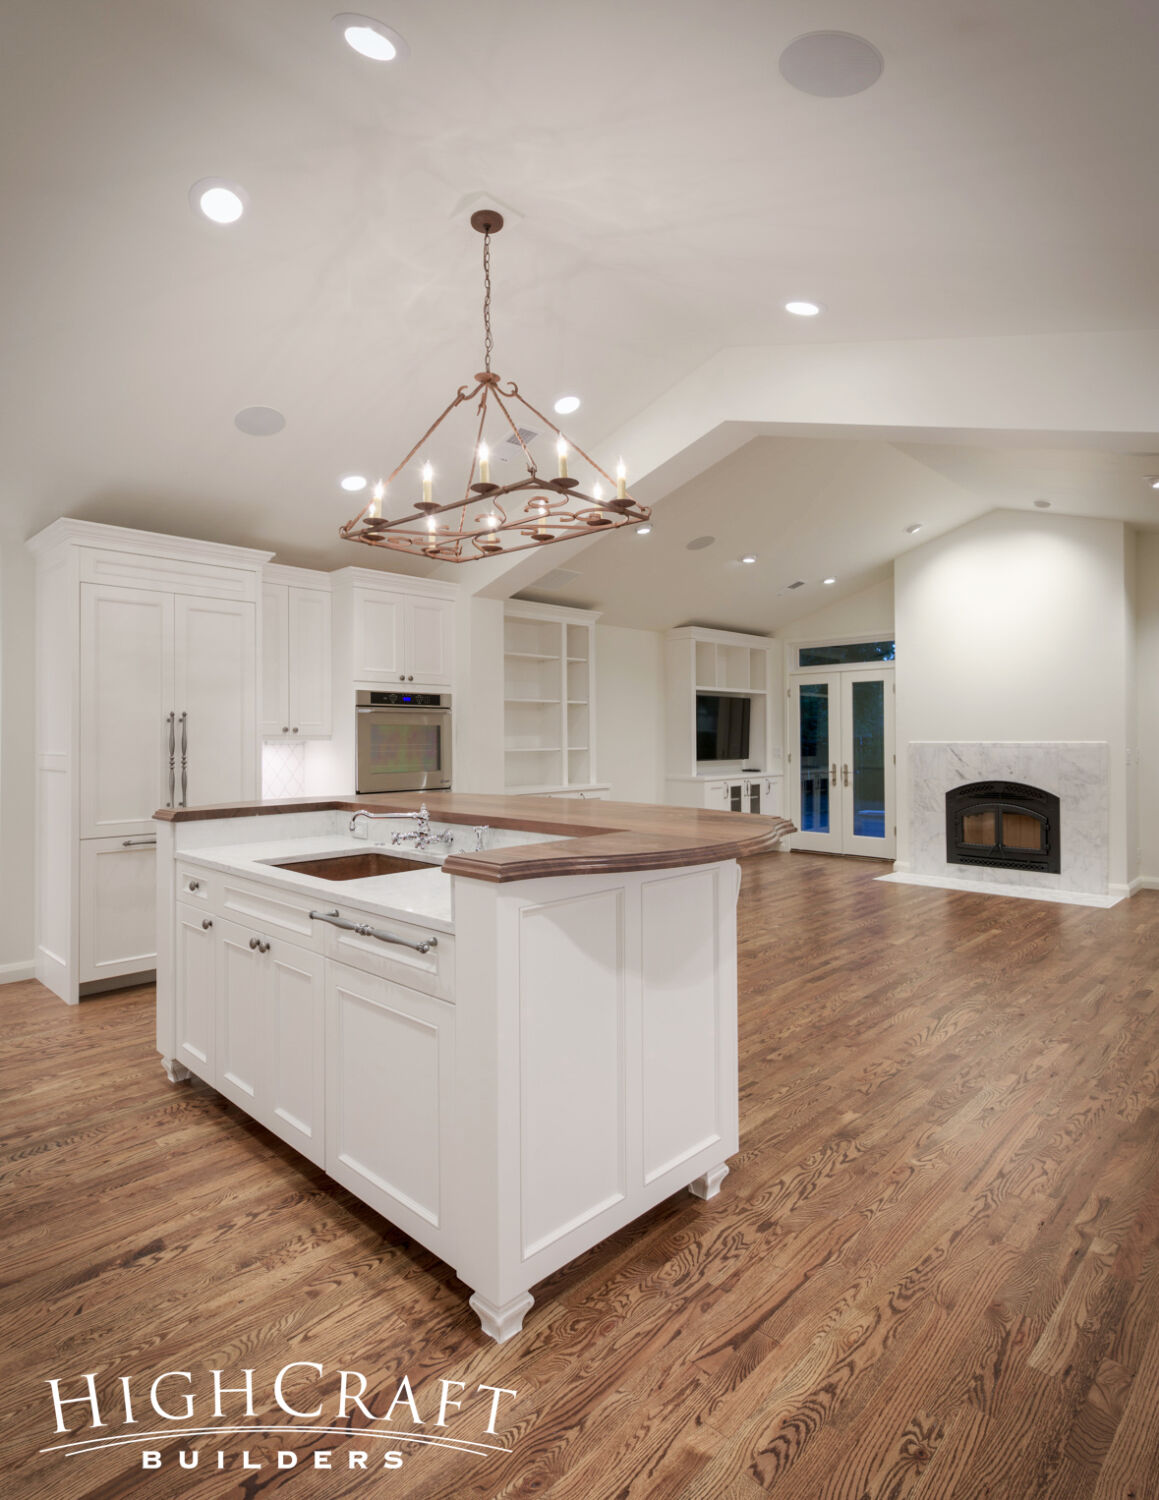 Kitchen-And-Great-Room-Addition-Furniture-Leg-White-Cabinet-Island-Chandelier-Wood-Countertop-Quartz-Oak-Flooring-Fireplace-Vaulted-Ceiling